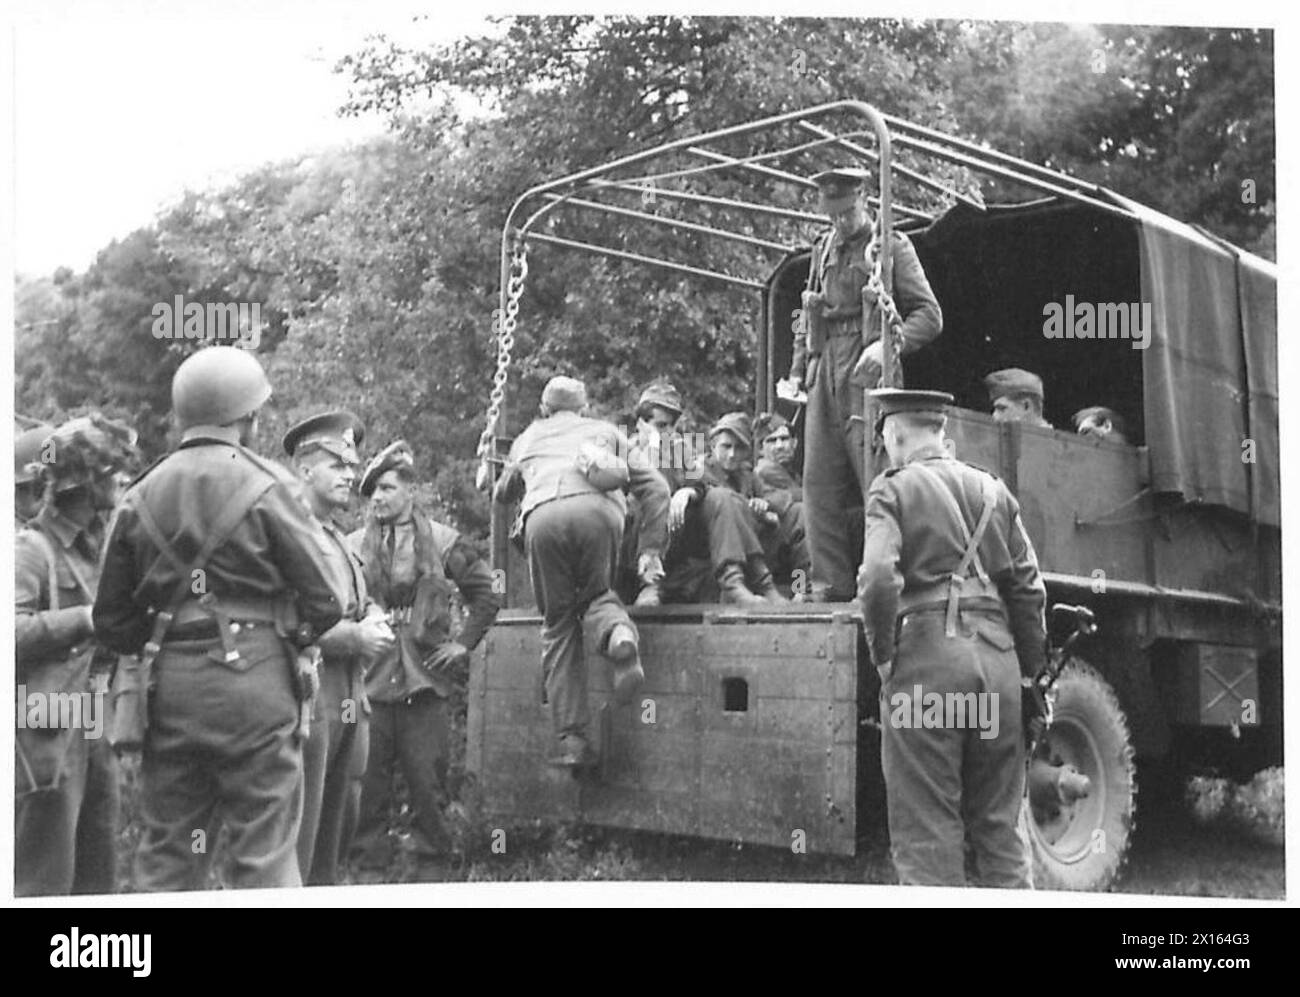 THE BRITISH ARMY IN NORTH-WEST EUROPE 1944-1945 - German prisoners of 21 Panzer Grenadier Regiment, getting into a lorry to be taken down to base outside Longueval by 5 Commandos British Army, 21st Army Group Stock Photo